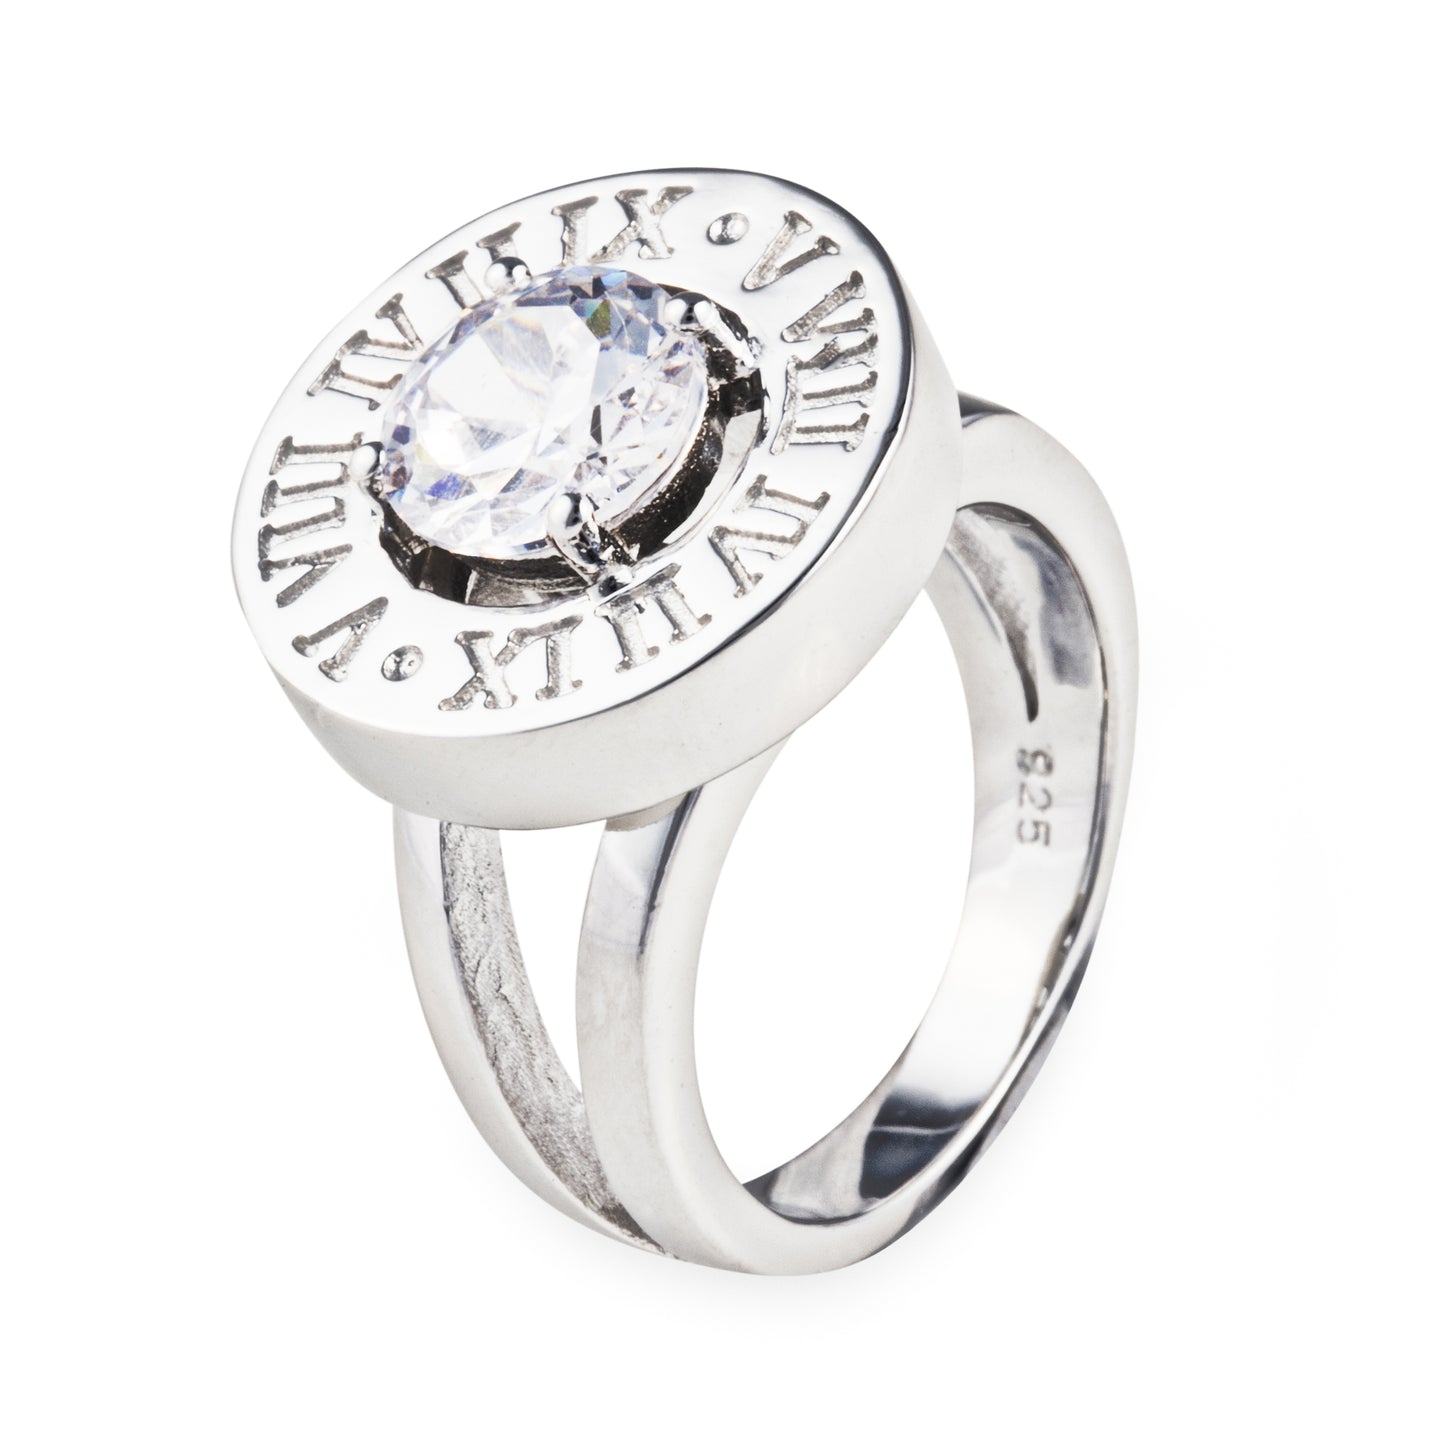 Eden Stone Ring in 925 sterling silver with 2-carat cubic zirconia stone surrounded by Roman numerals. Jewellery by Bellagio & Co. Worldwide shipping